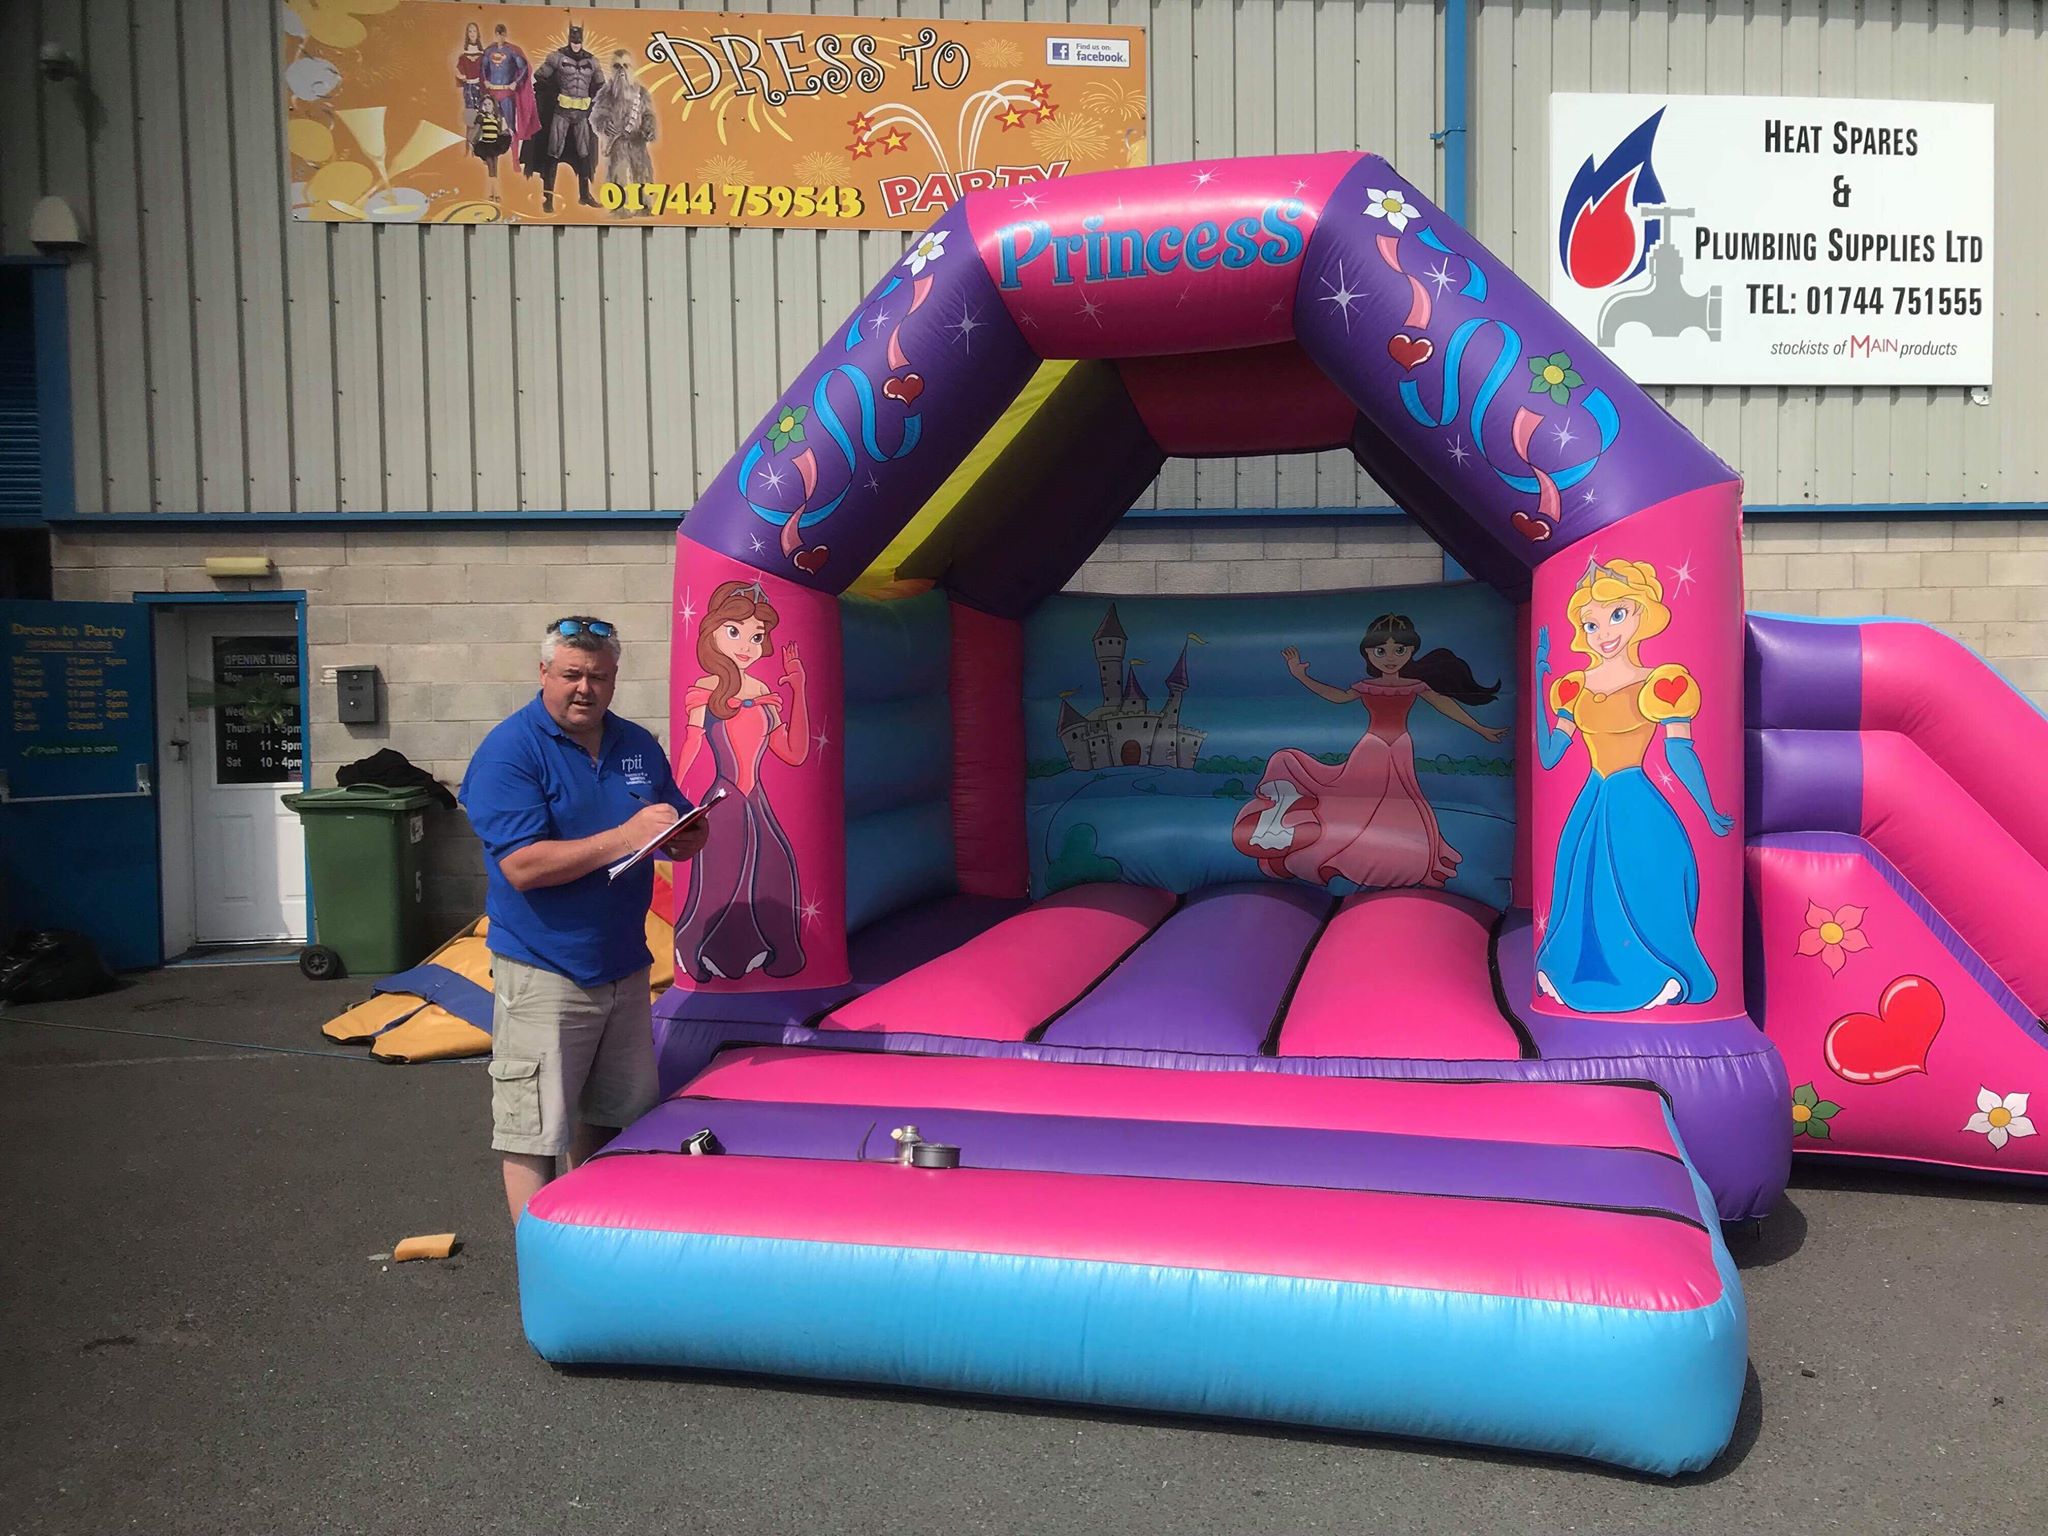 RPII registered PIPA inspector completing an annual test on an inflatable bouncy castle for SJ's Leisure based in St Helens